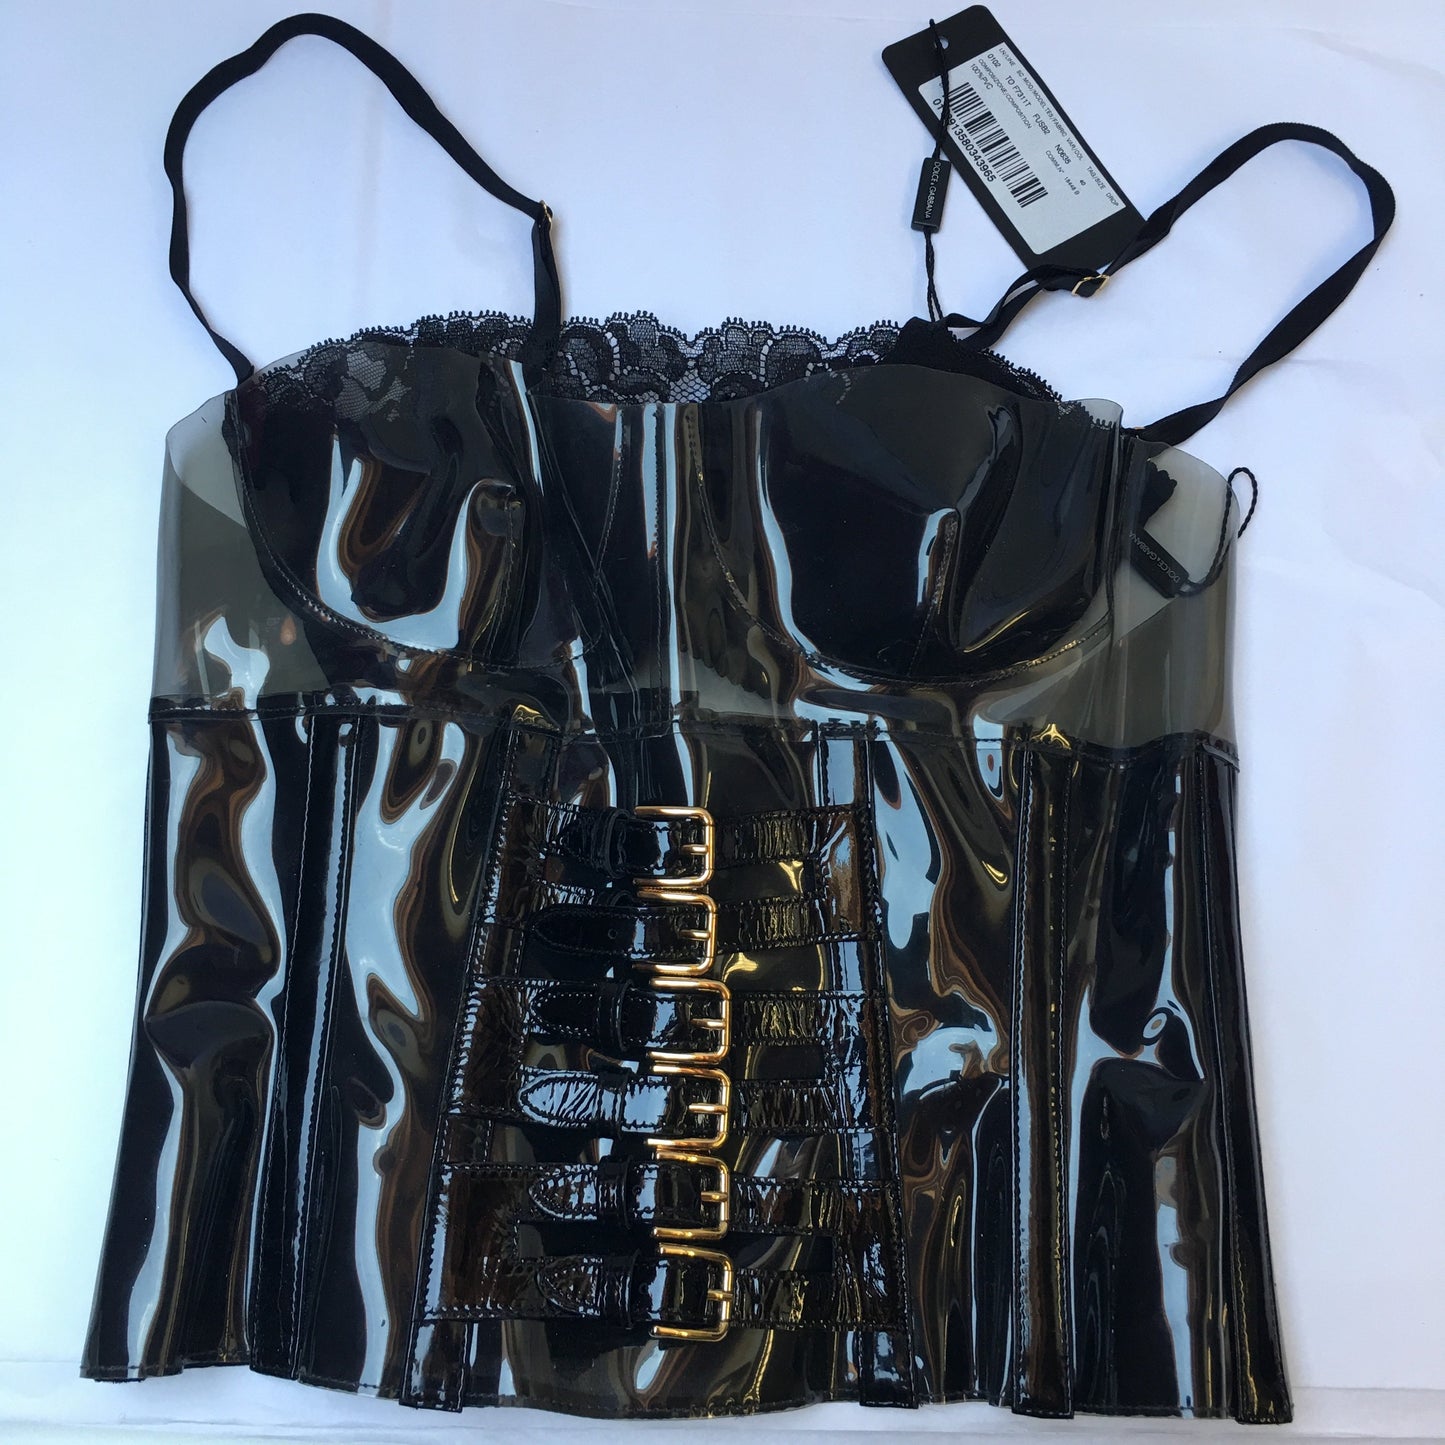 DOLCE & GABBANA PVS CORSET TOP SIZE 8 40 IT - new with tags Runway 2007